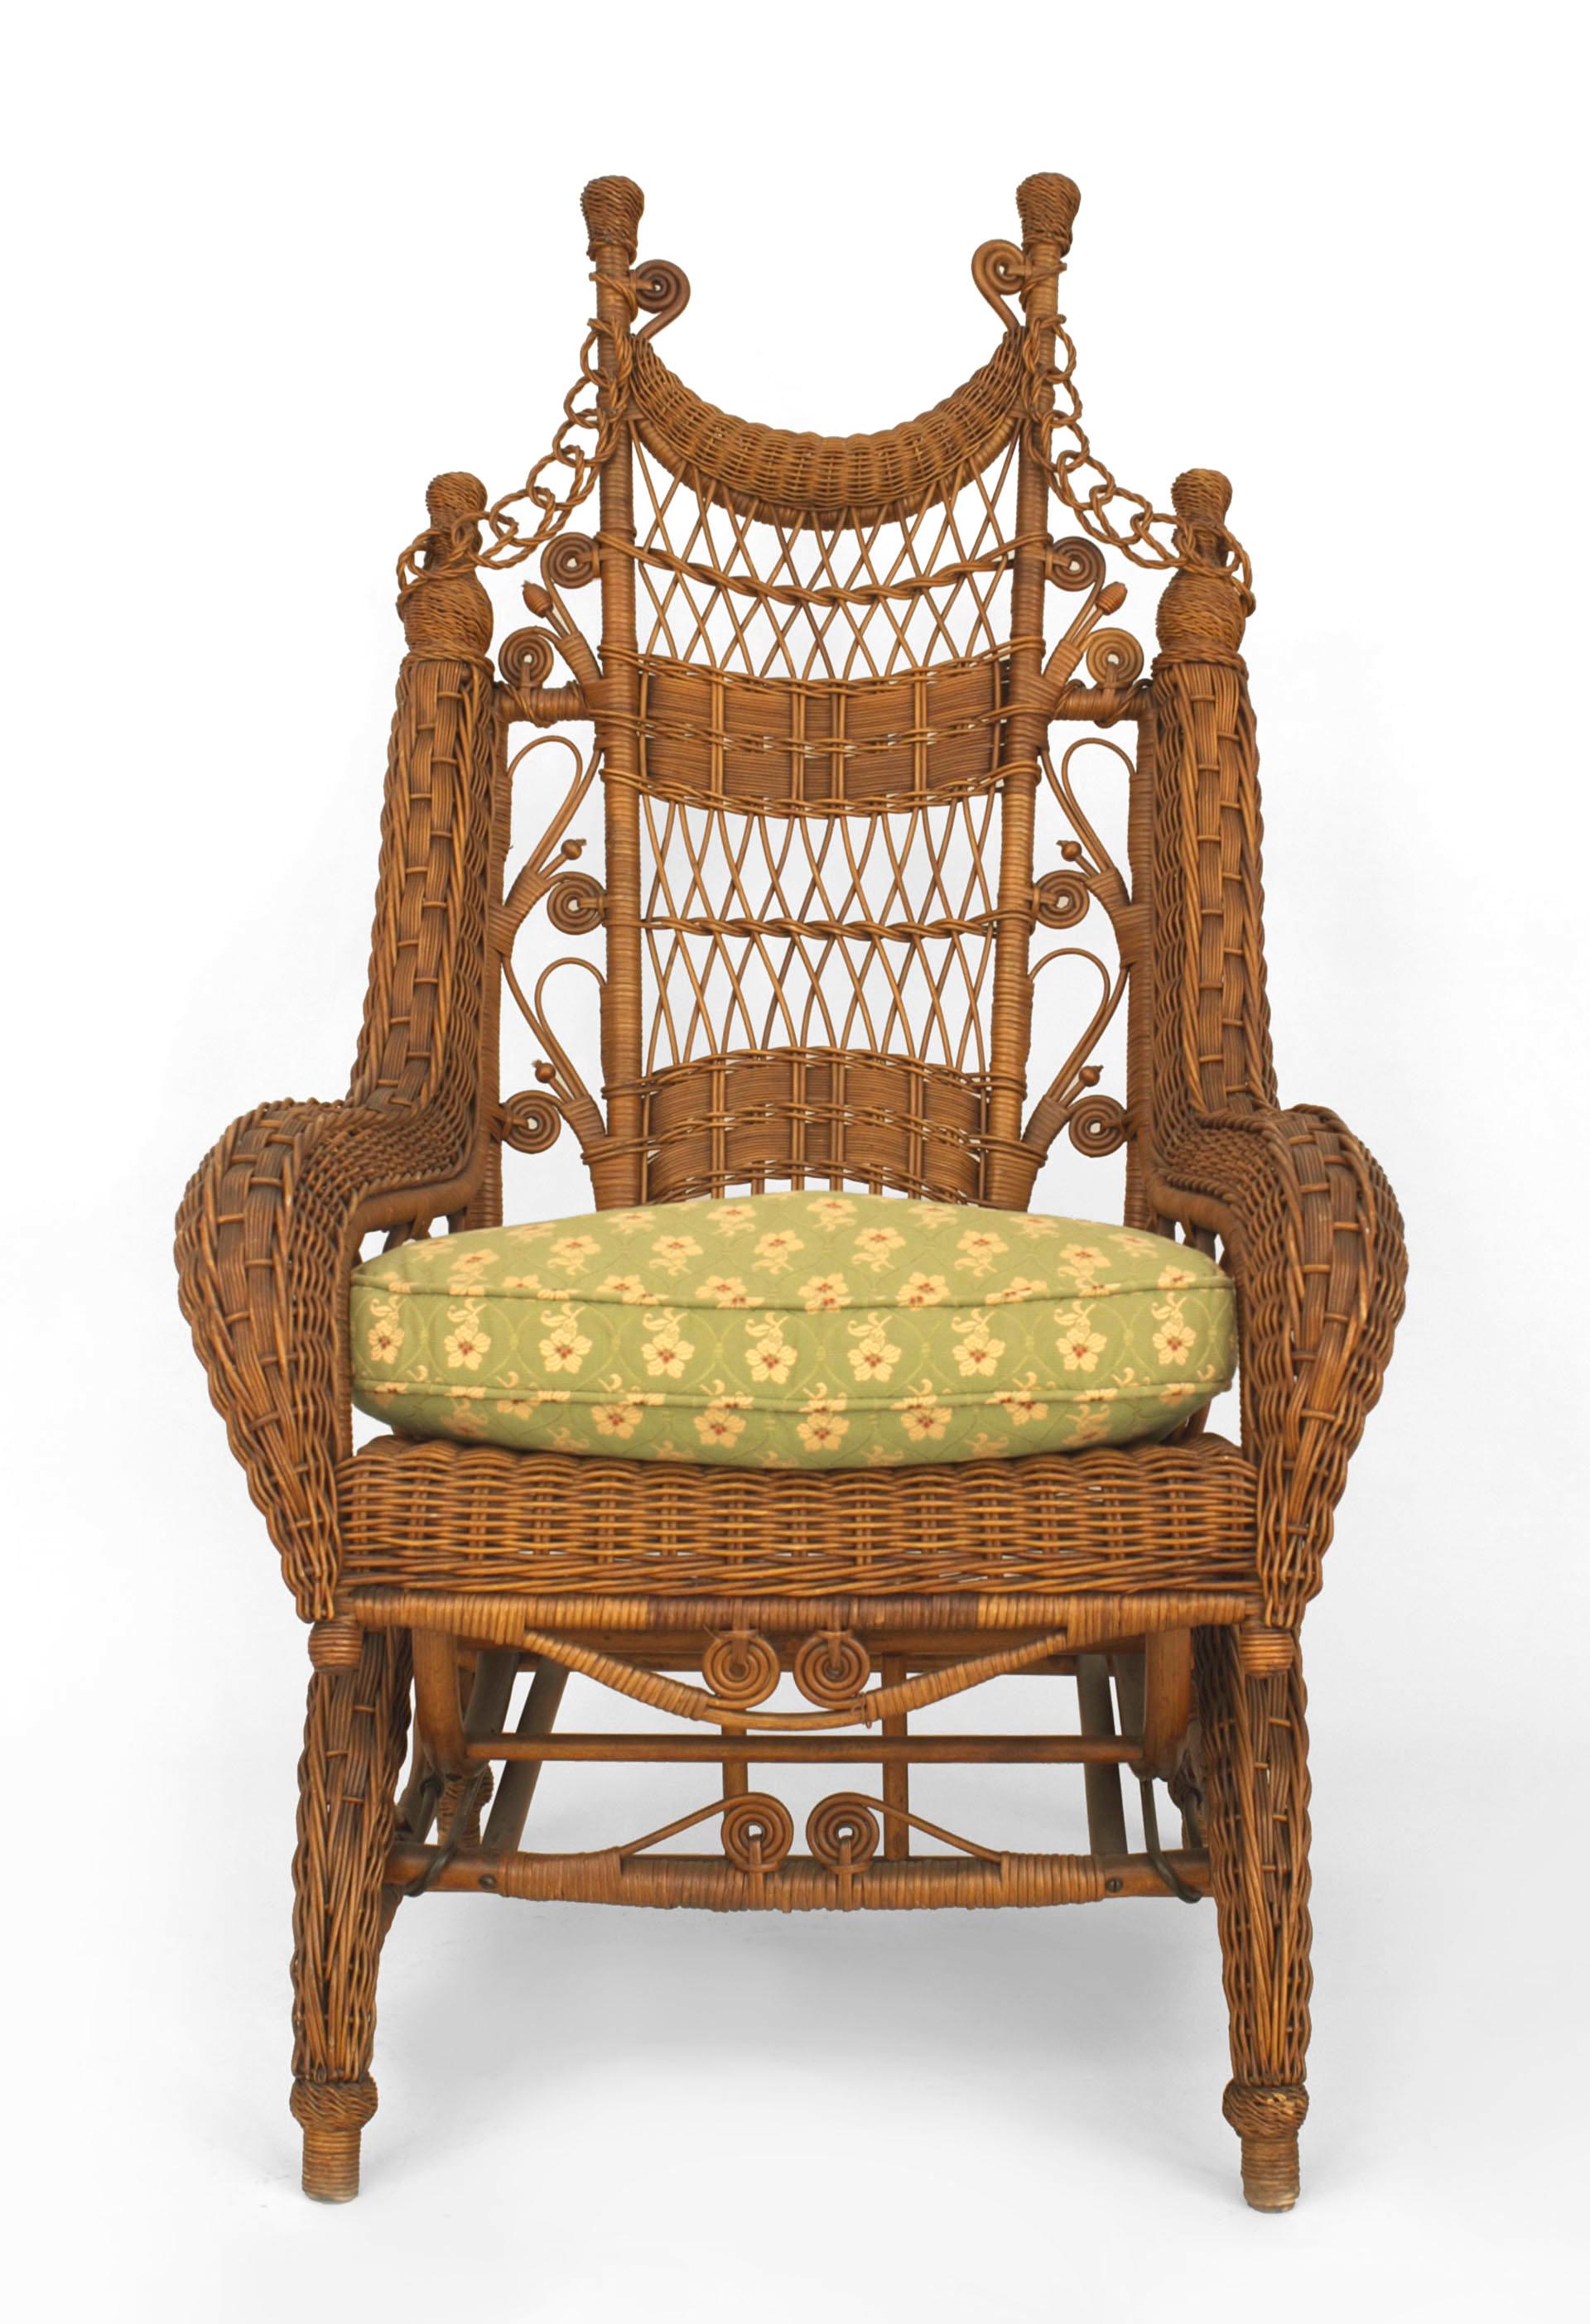 American Victorian natural wicker ornate high back platform rocking chair with woven rolled arms and finials & swag chain link on back (HEYWOOD BROS.)
